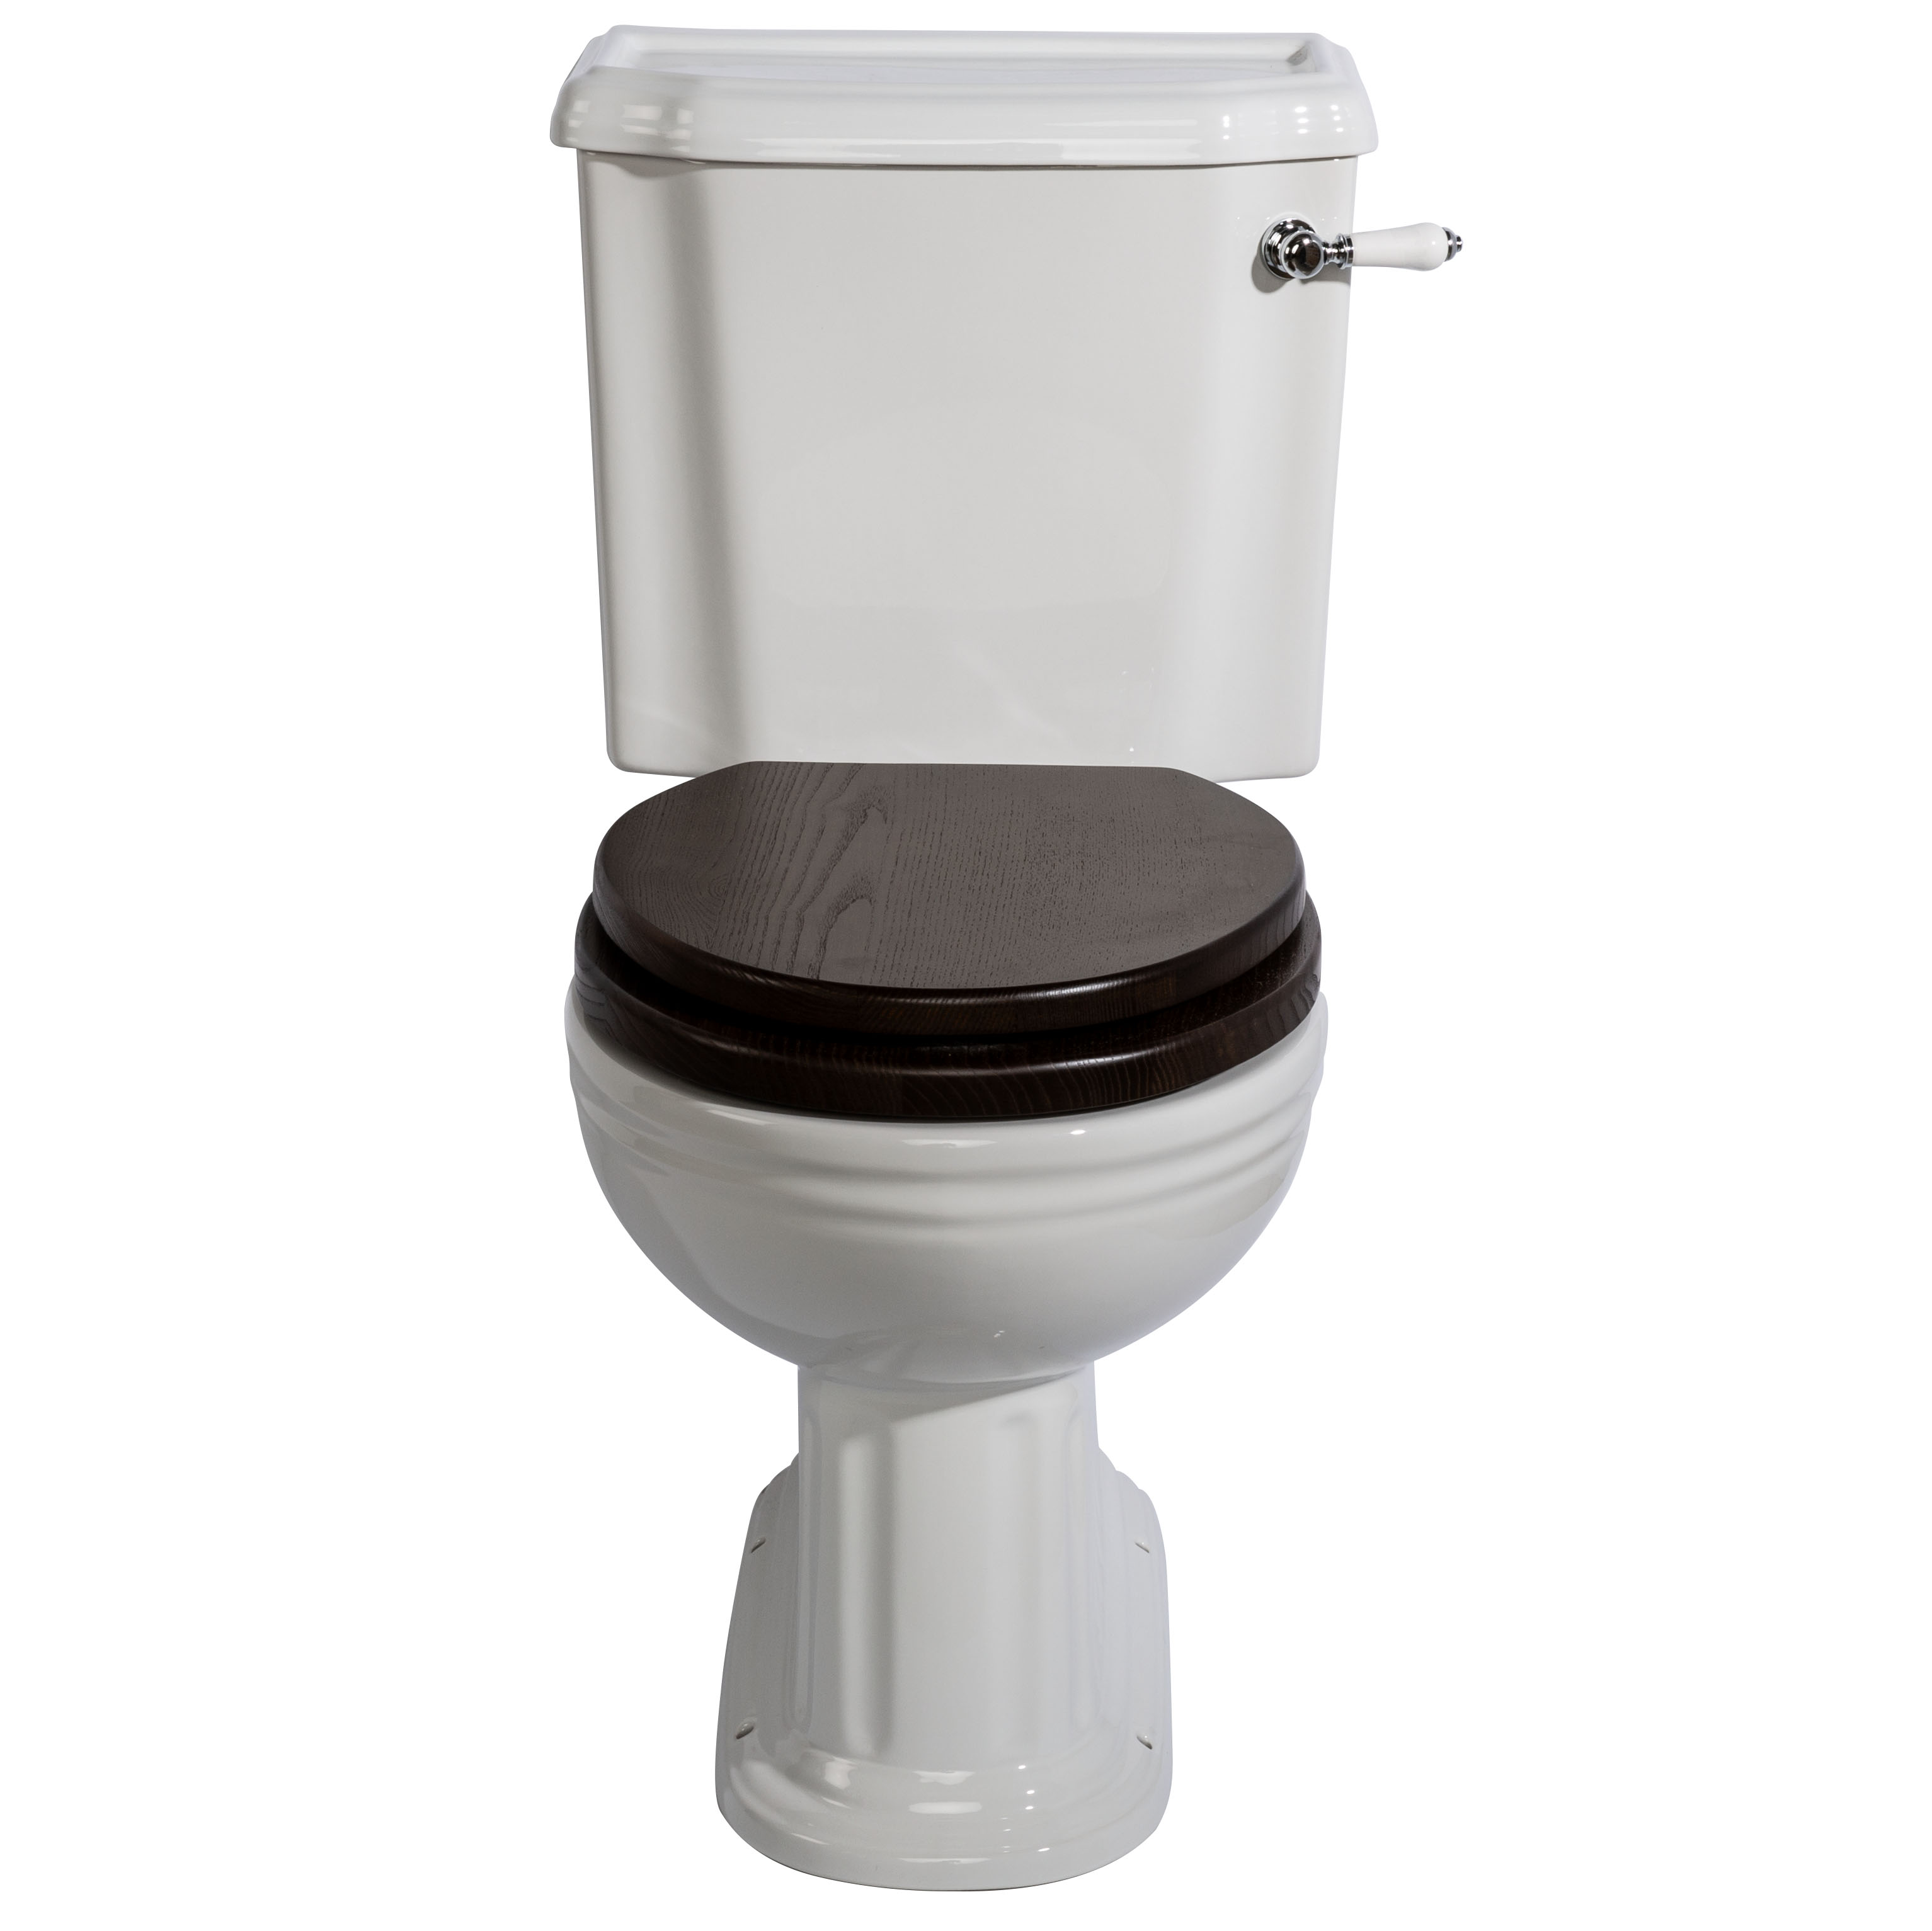 MS12-wc-chasse-attenante Brighton WC, attached cistern